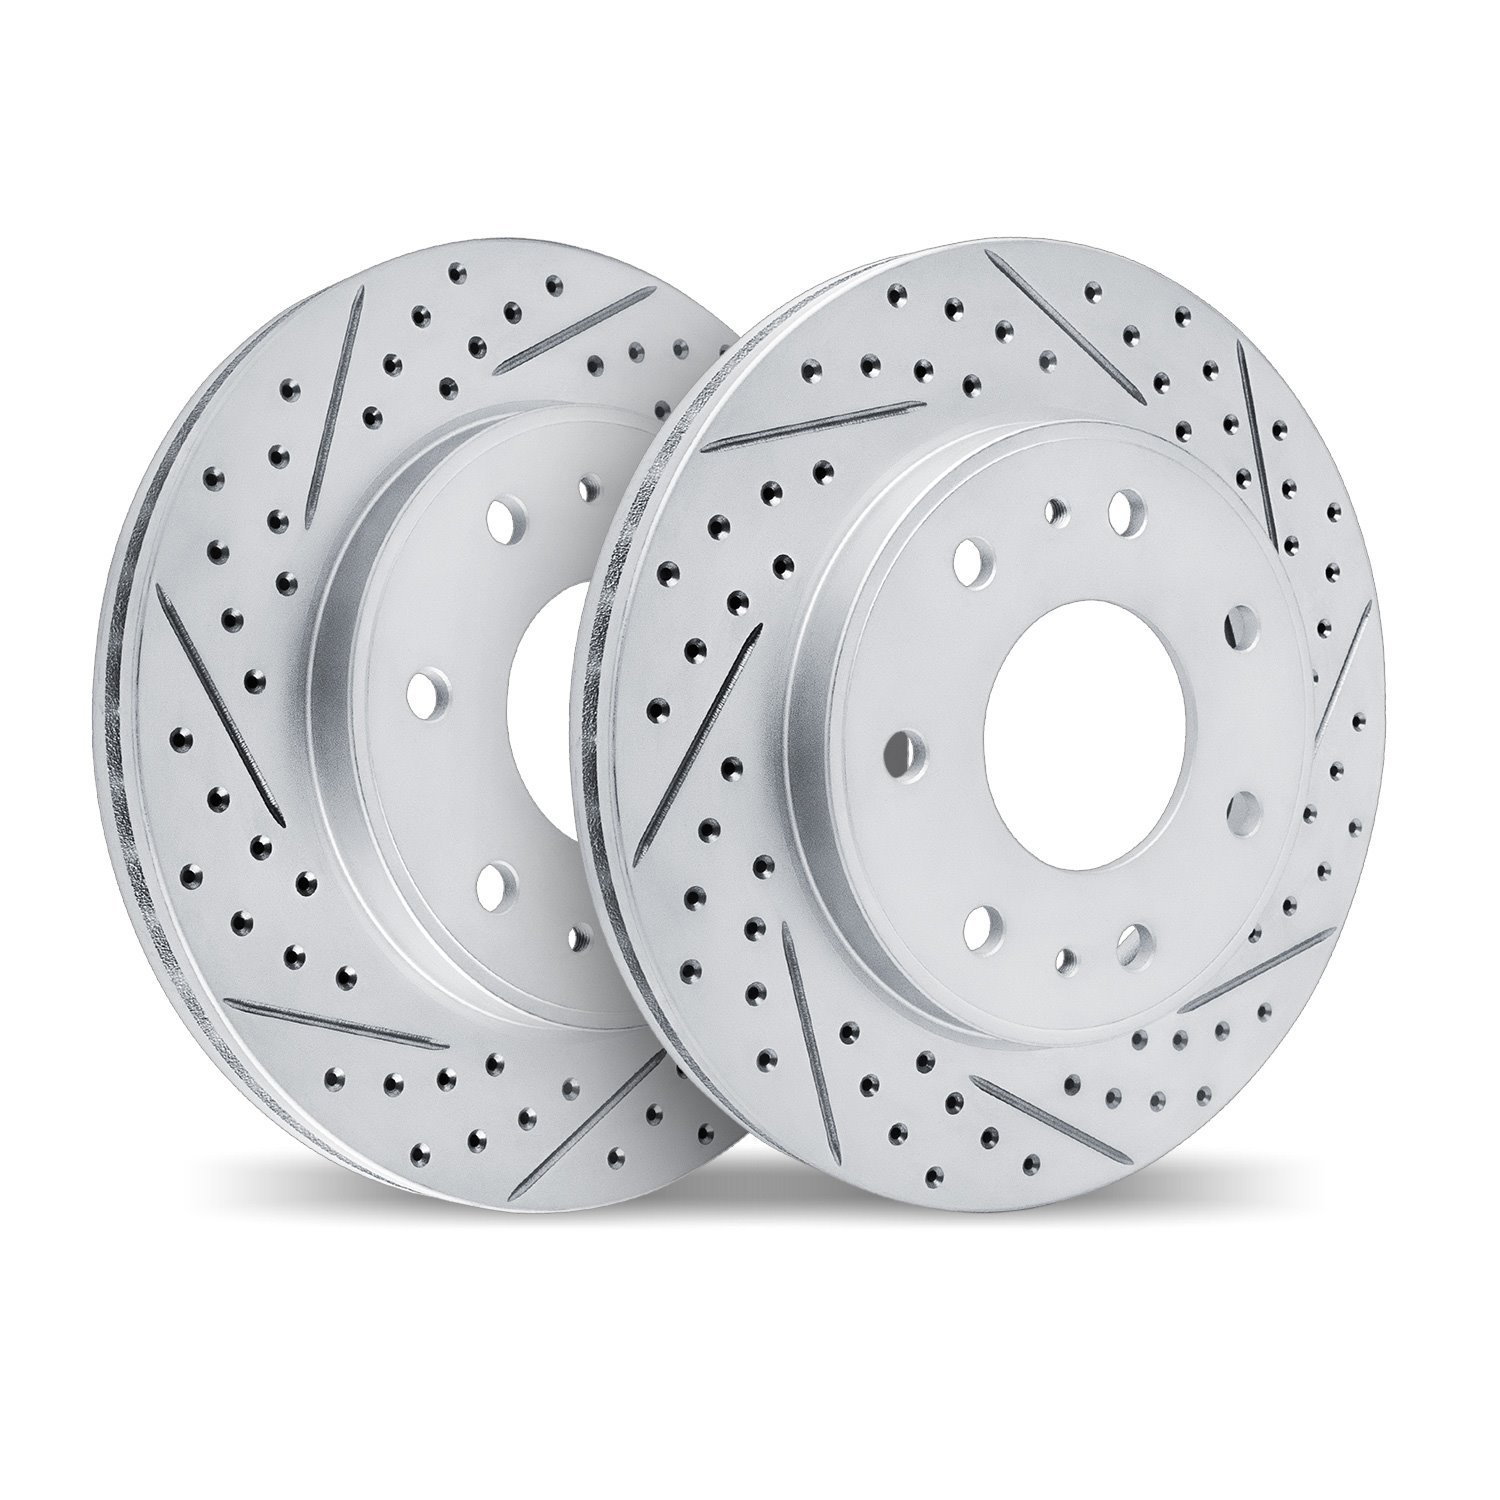 2002-54147 Geoperformance Drilled/Slotted Brake Rotors, 2004-2011 Ford/Lincoln/Mercury/Mazda, Position: Rear